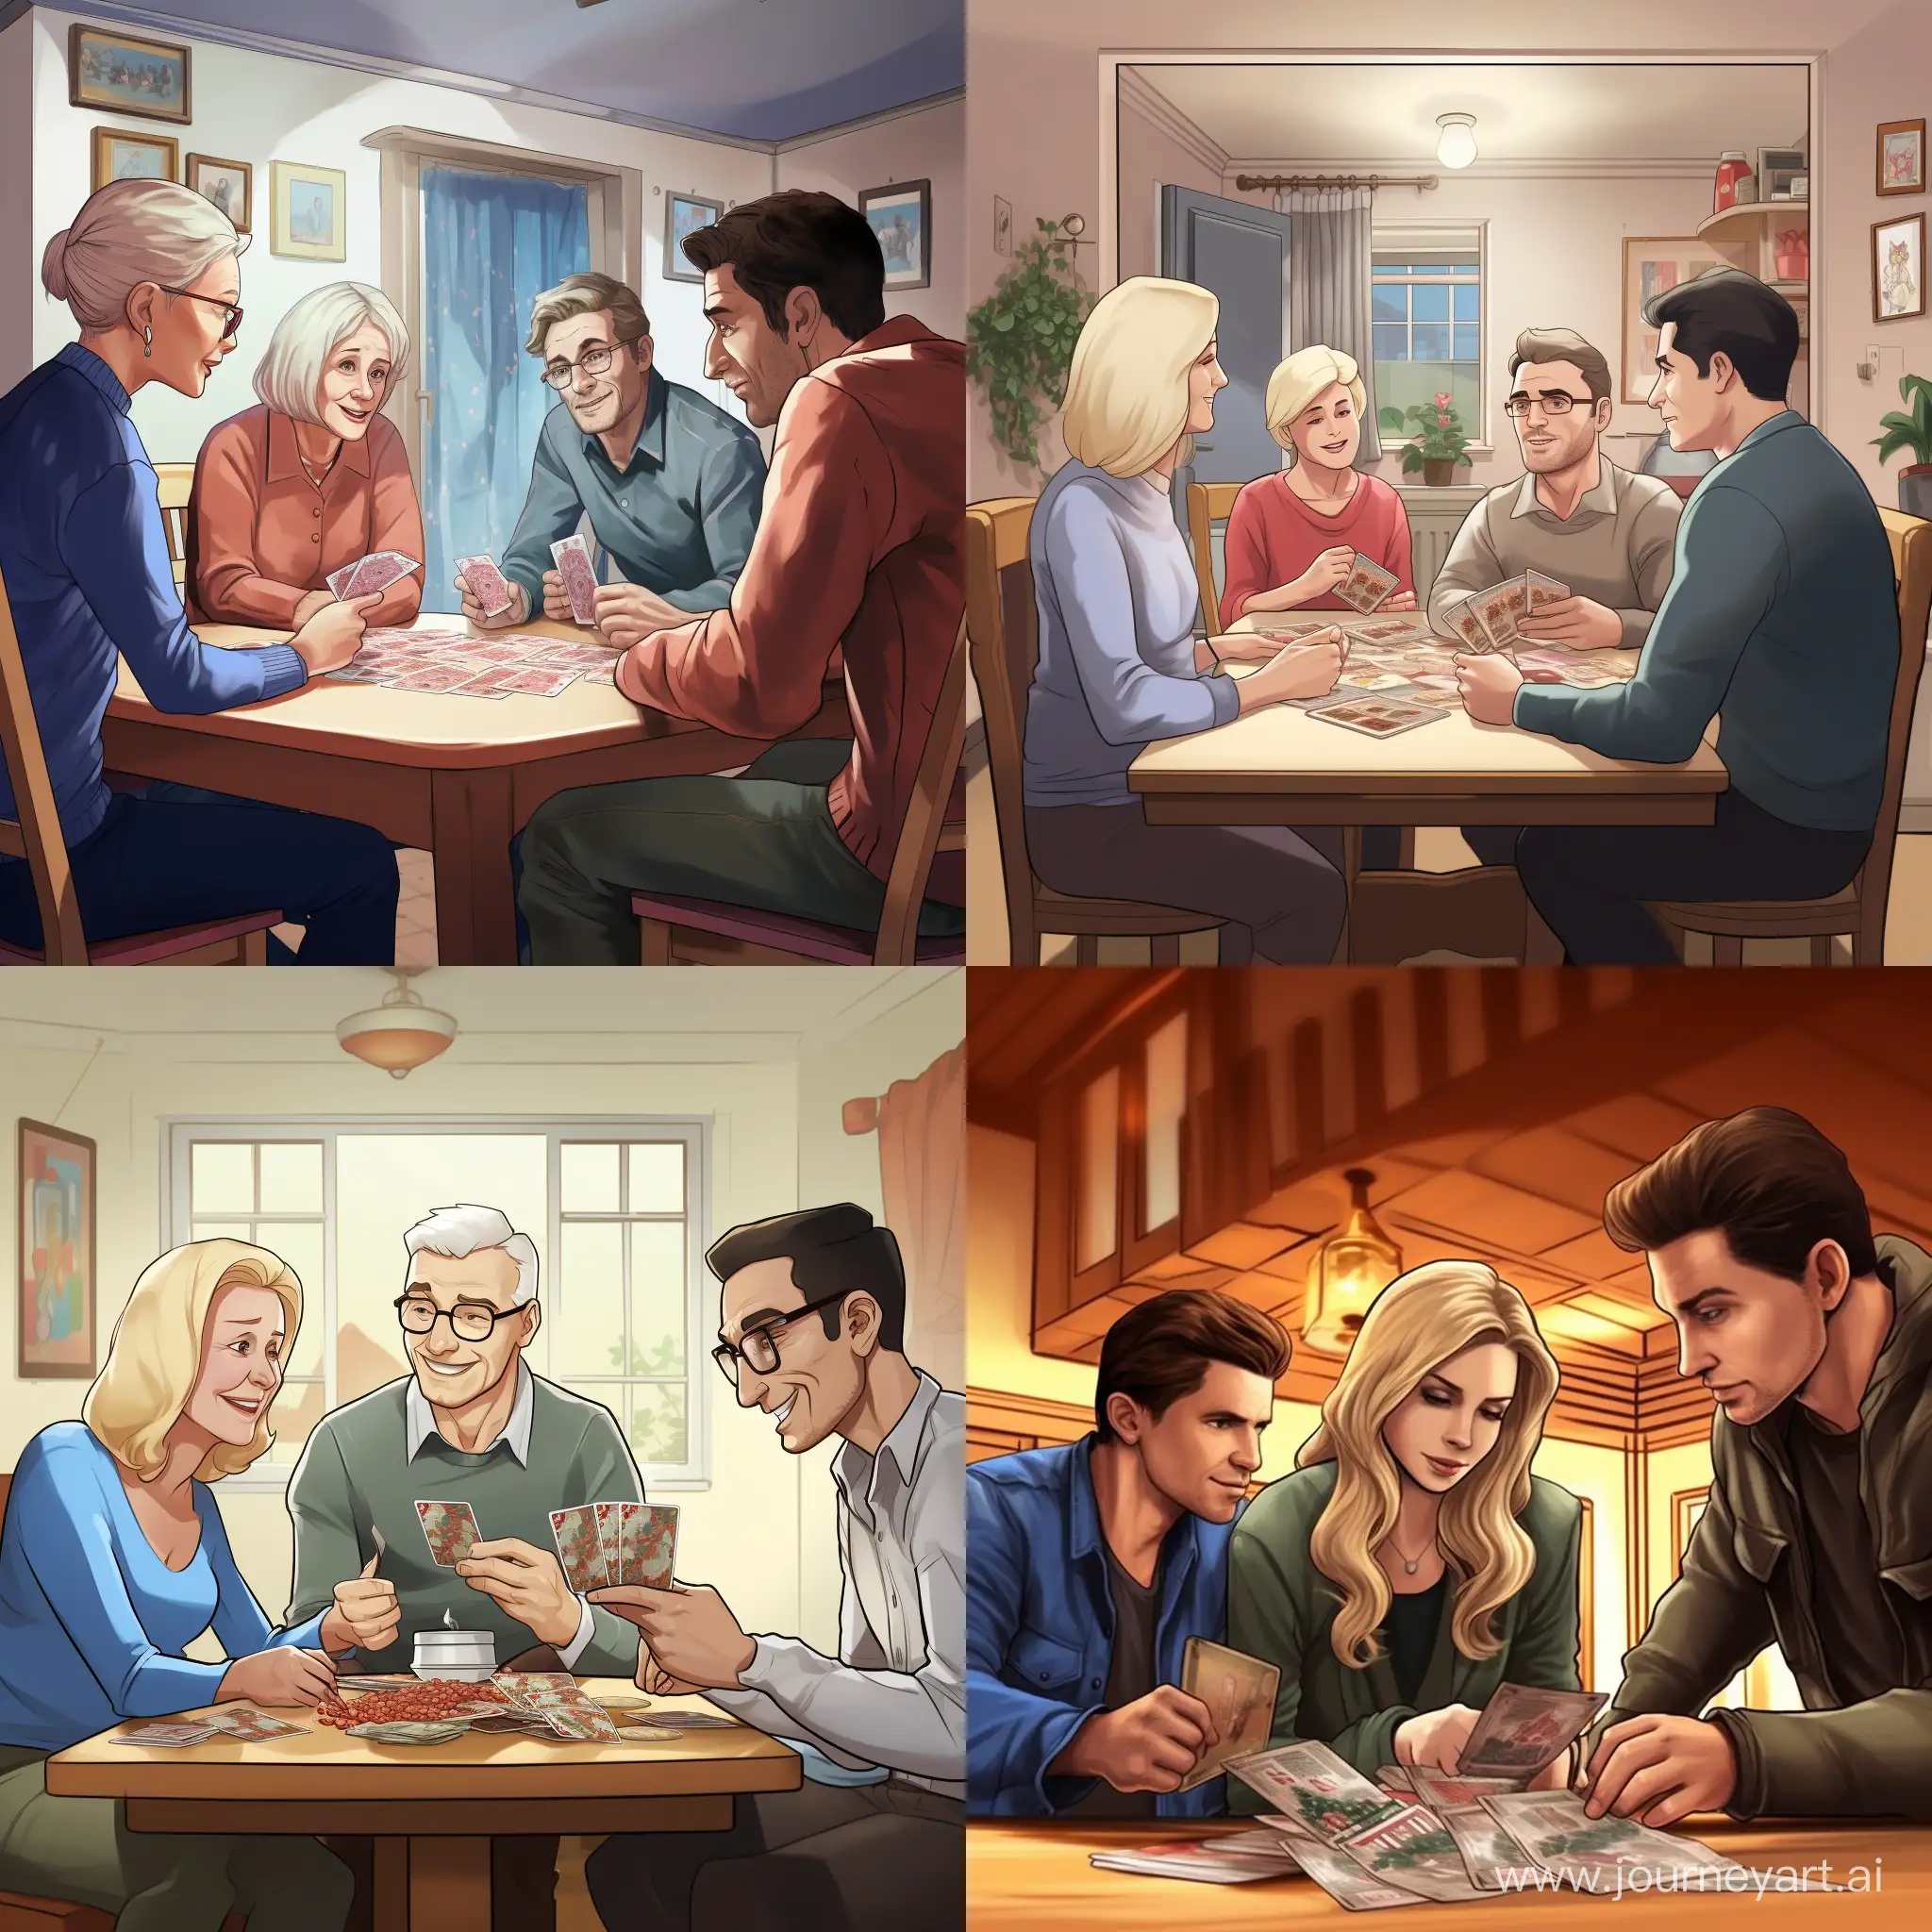 Please generate super realistic view of 4 people playing game: "Tajniacy" (english name: codenames). First person: 34 years old man, second person: 33 years old man, third person 63 years old man, fourth person: 62 years old woman (blond hair). Scenery is room during christmass. The game codename is card game, where 25 cards are placed on table. wo teams compete by each having a "spymaster" give one-word clues that can point to multiple words on the board. The other players on the team attempt to guess their team's words while avoiding the words of the other team.